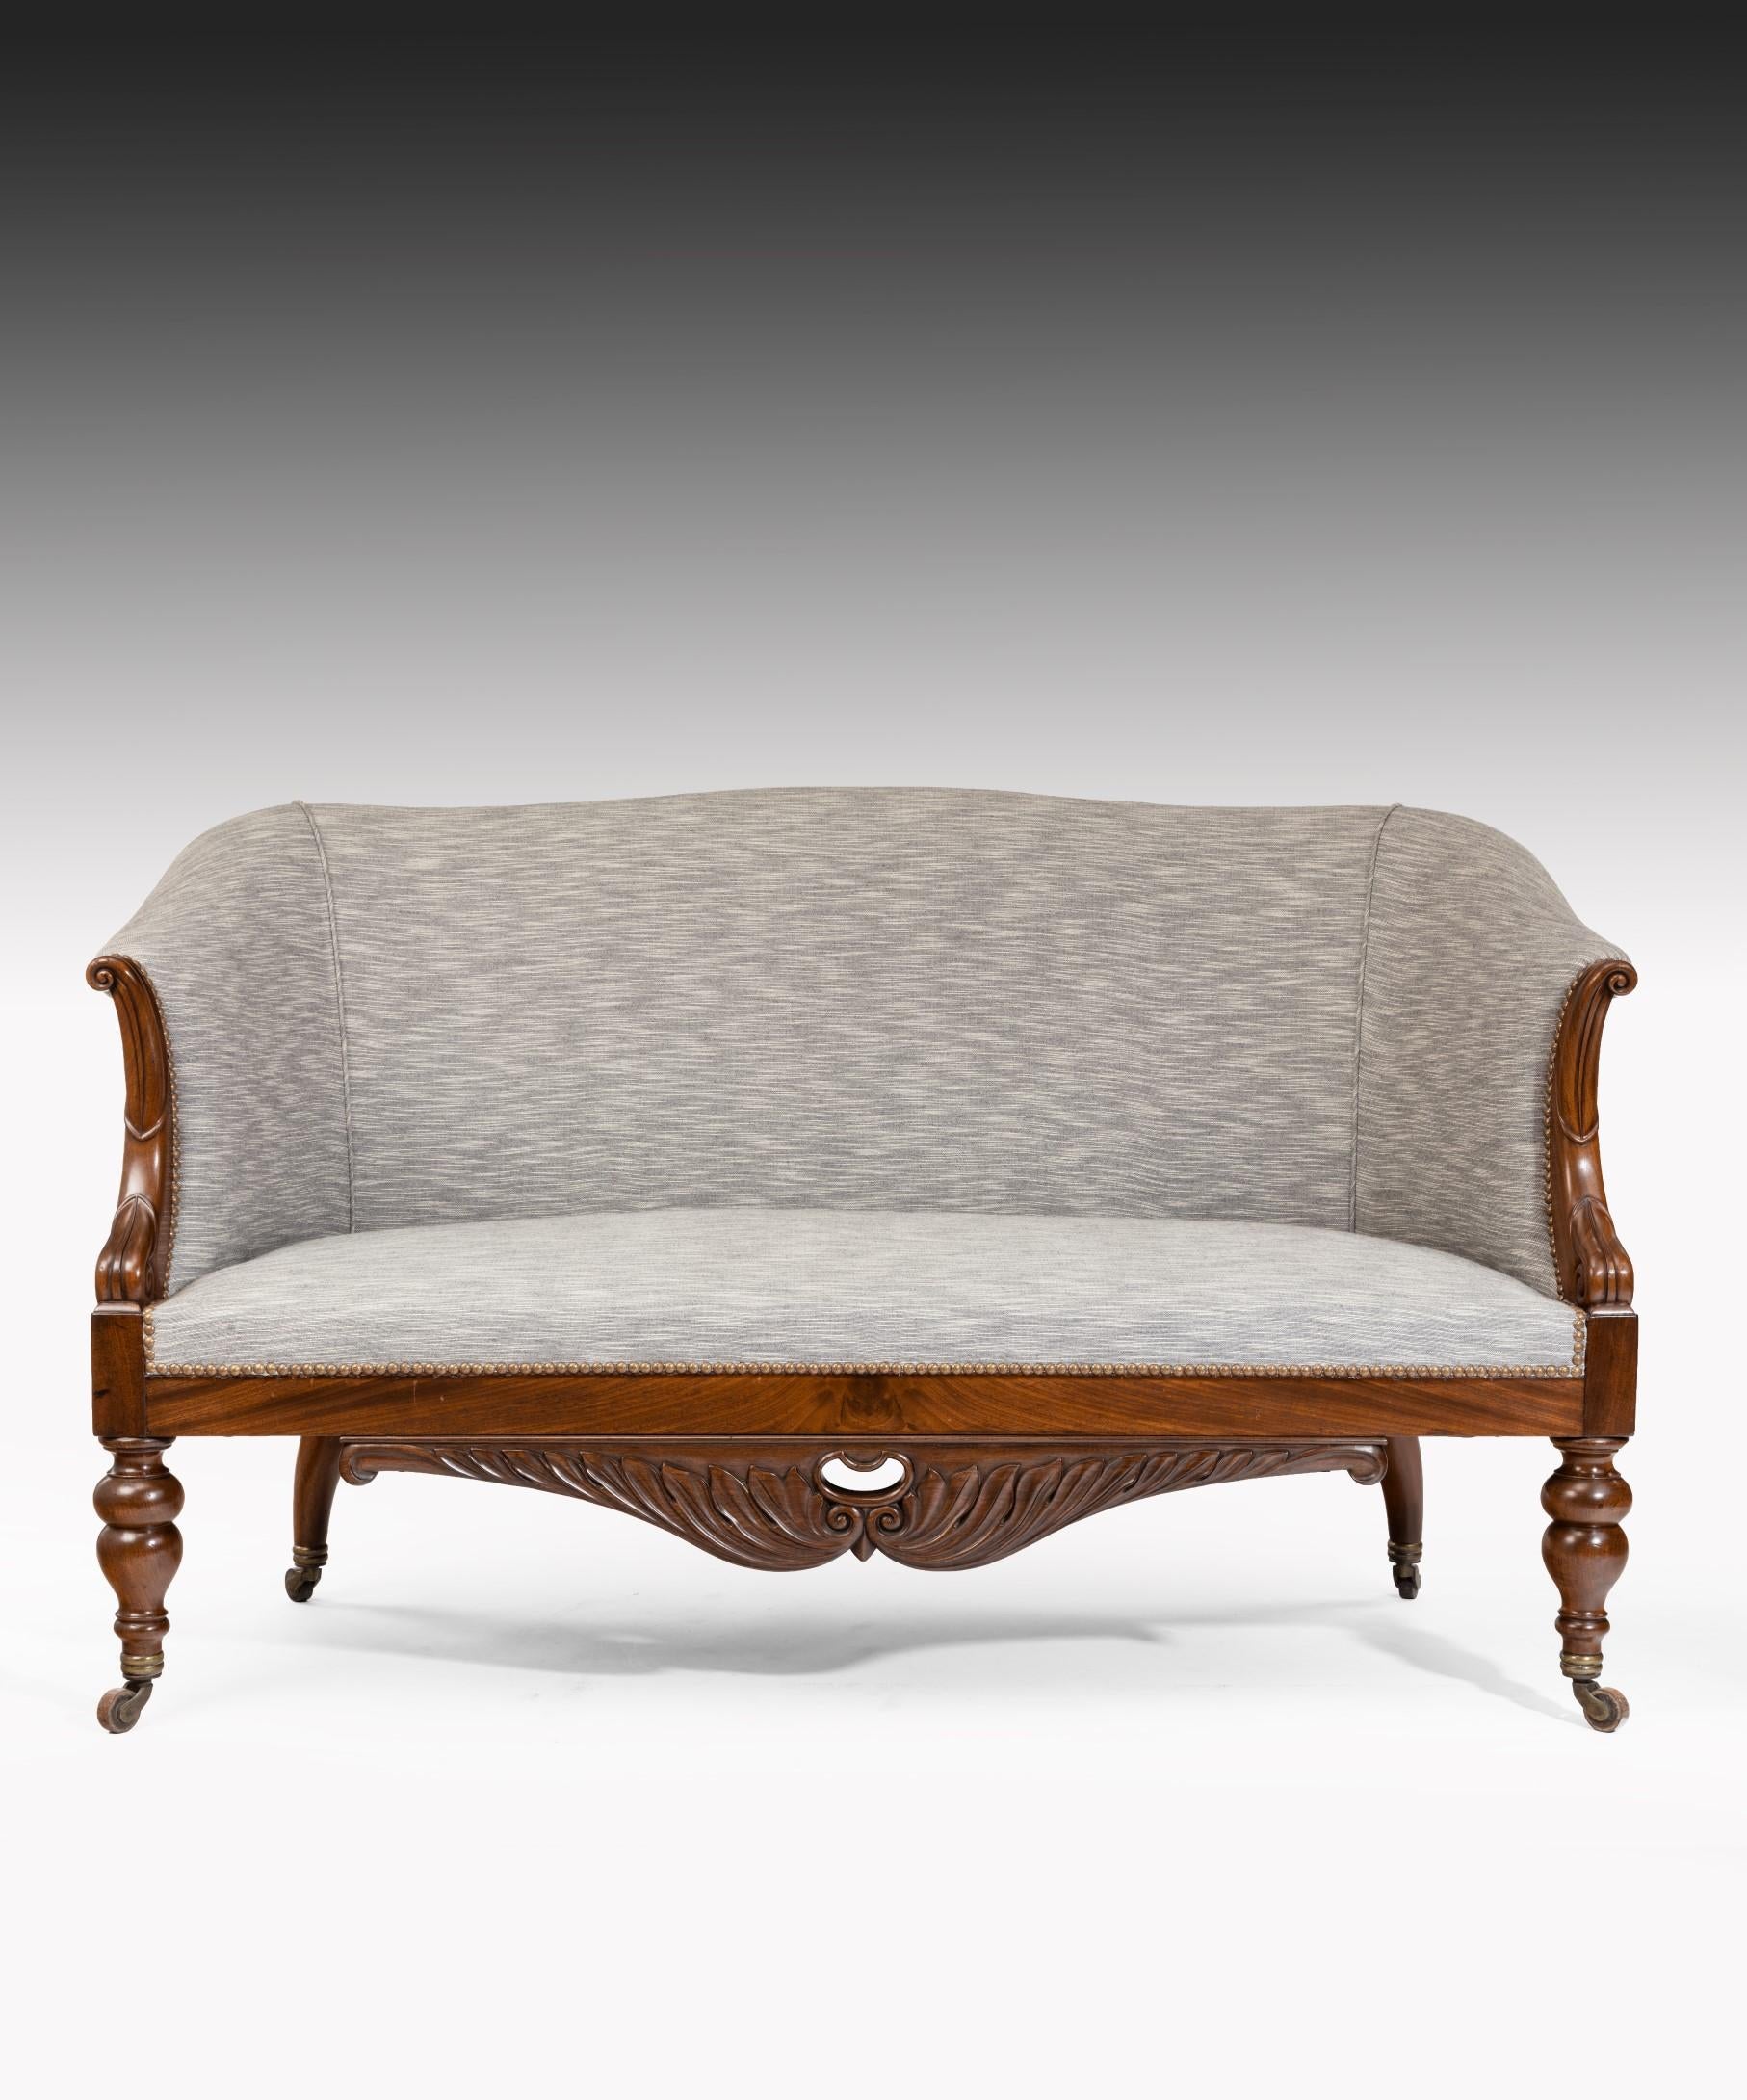 A comfortable pair of Charles X sofas with carved mahogany showwood frames; the sofa's upholstered back and seat with scrolling mahogany arms and a seat rail veneered and carved in well figured mahogany. The sofa is raised on turned front legs and